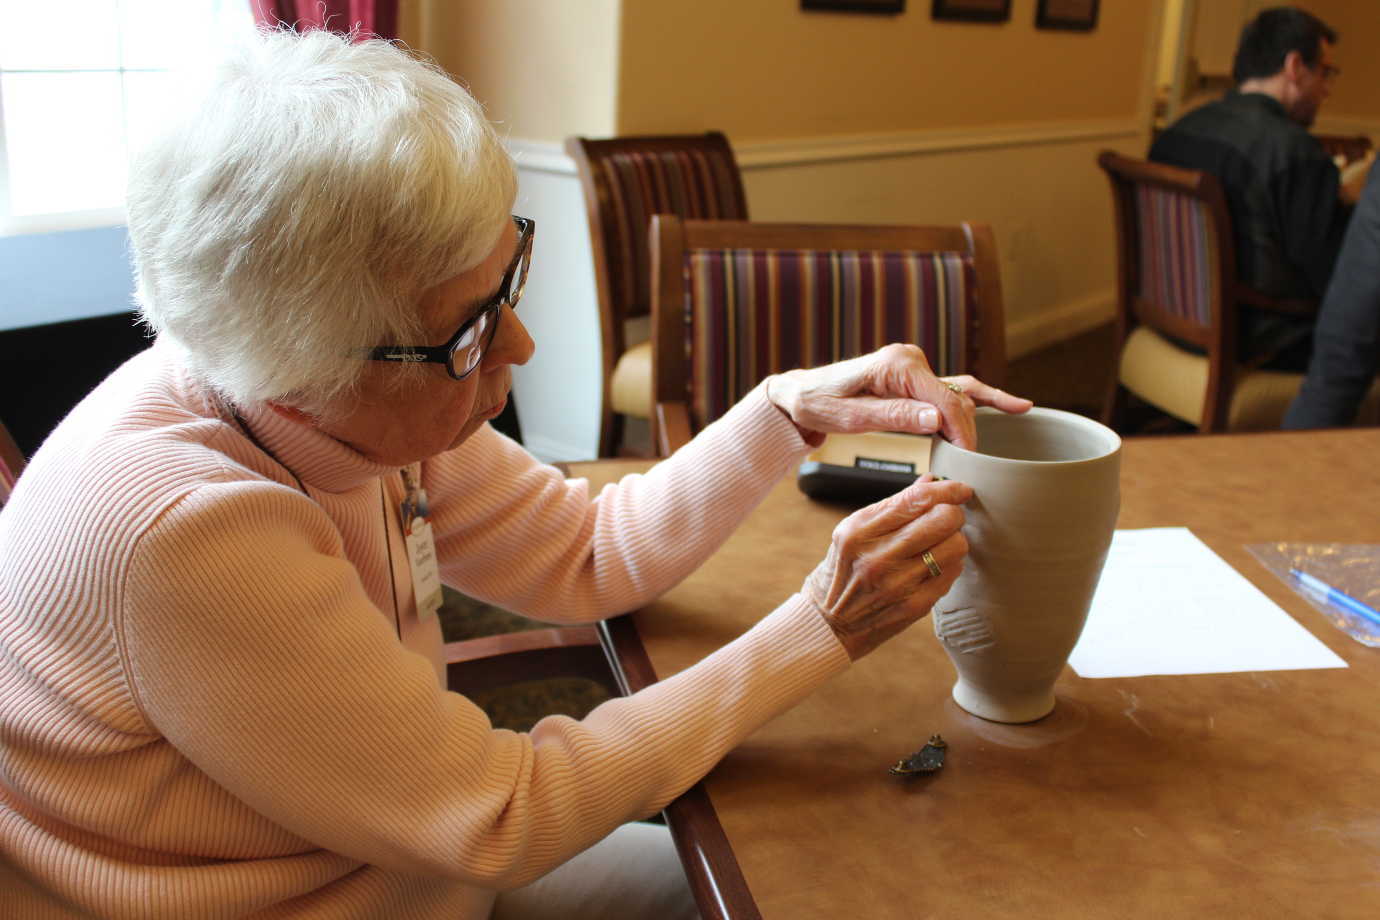 Project Unpack brought art workshops to assisted living centers. There, veterans and their families used personal mementos to make works of art while reflecting on their experiences. Image courtesy of Project Unpack.